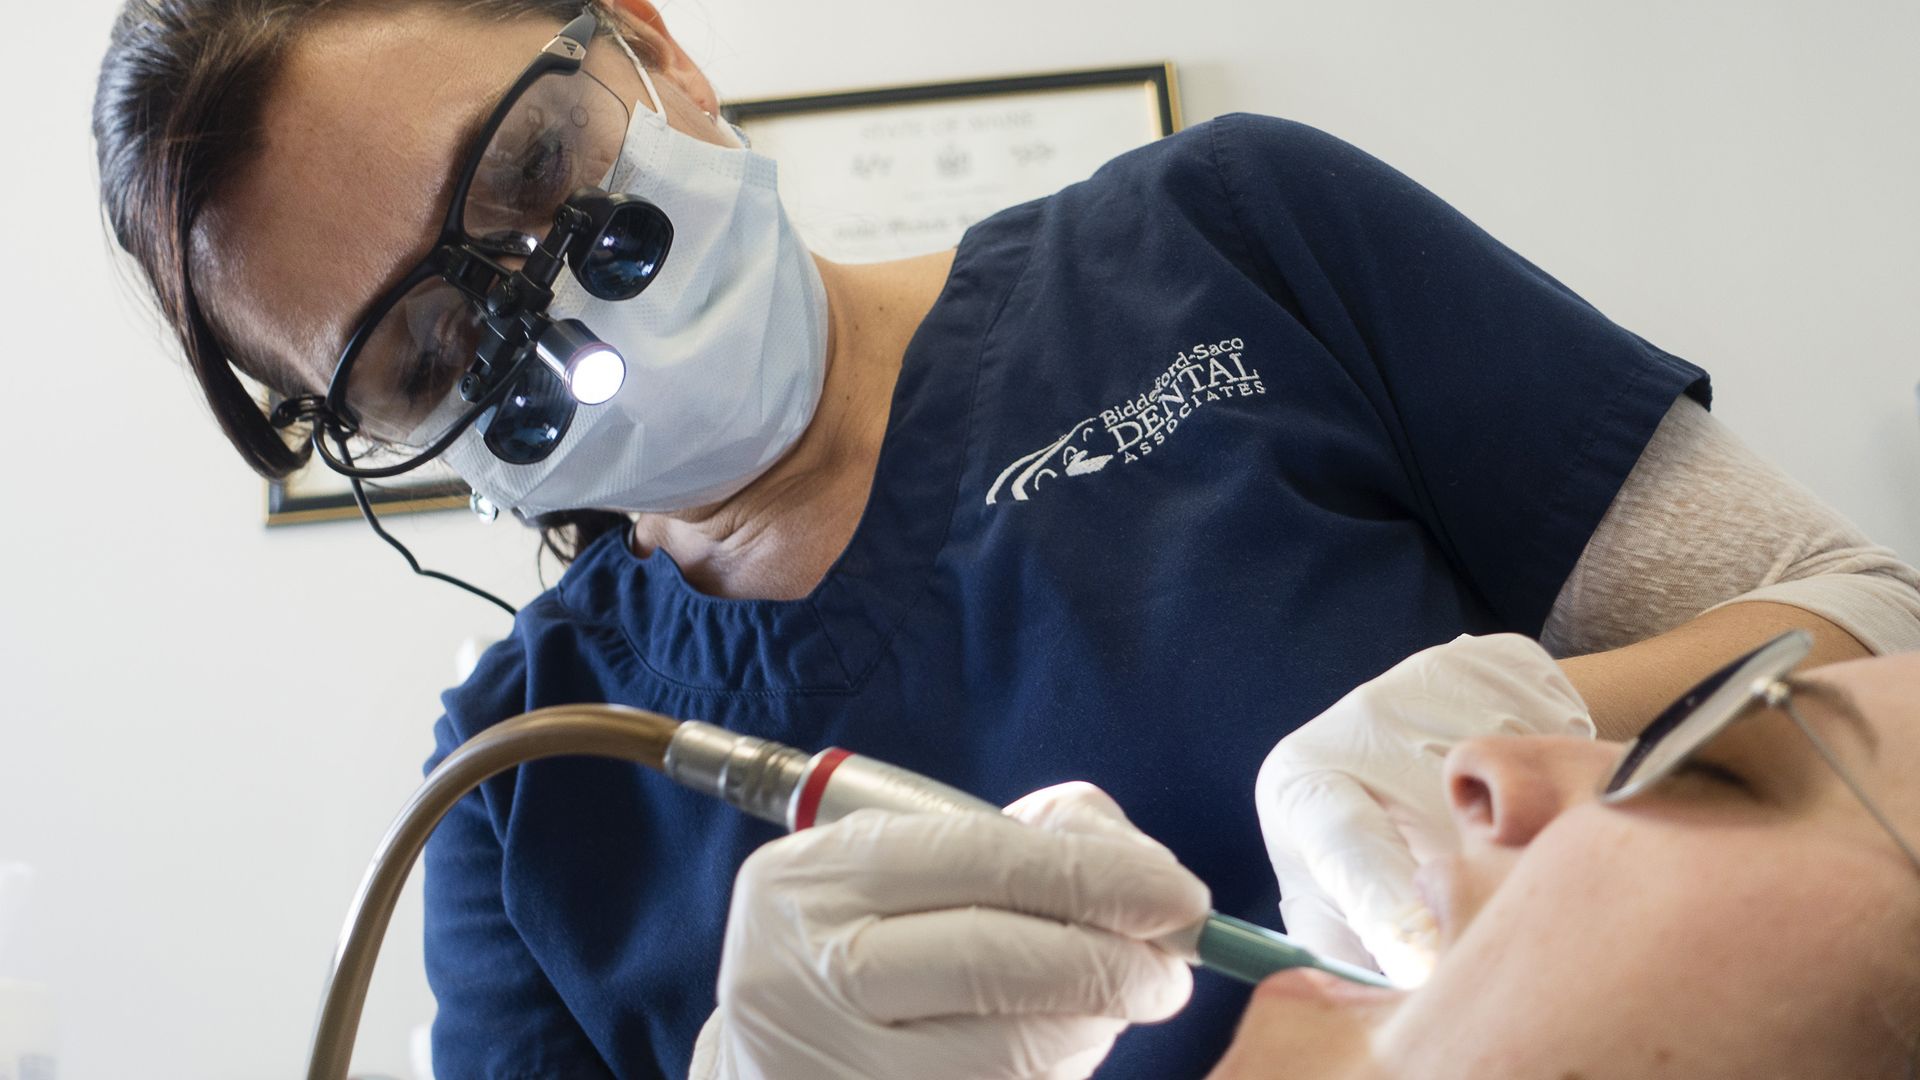 A dental hygienist works in a patient's mouth.